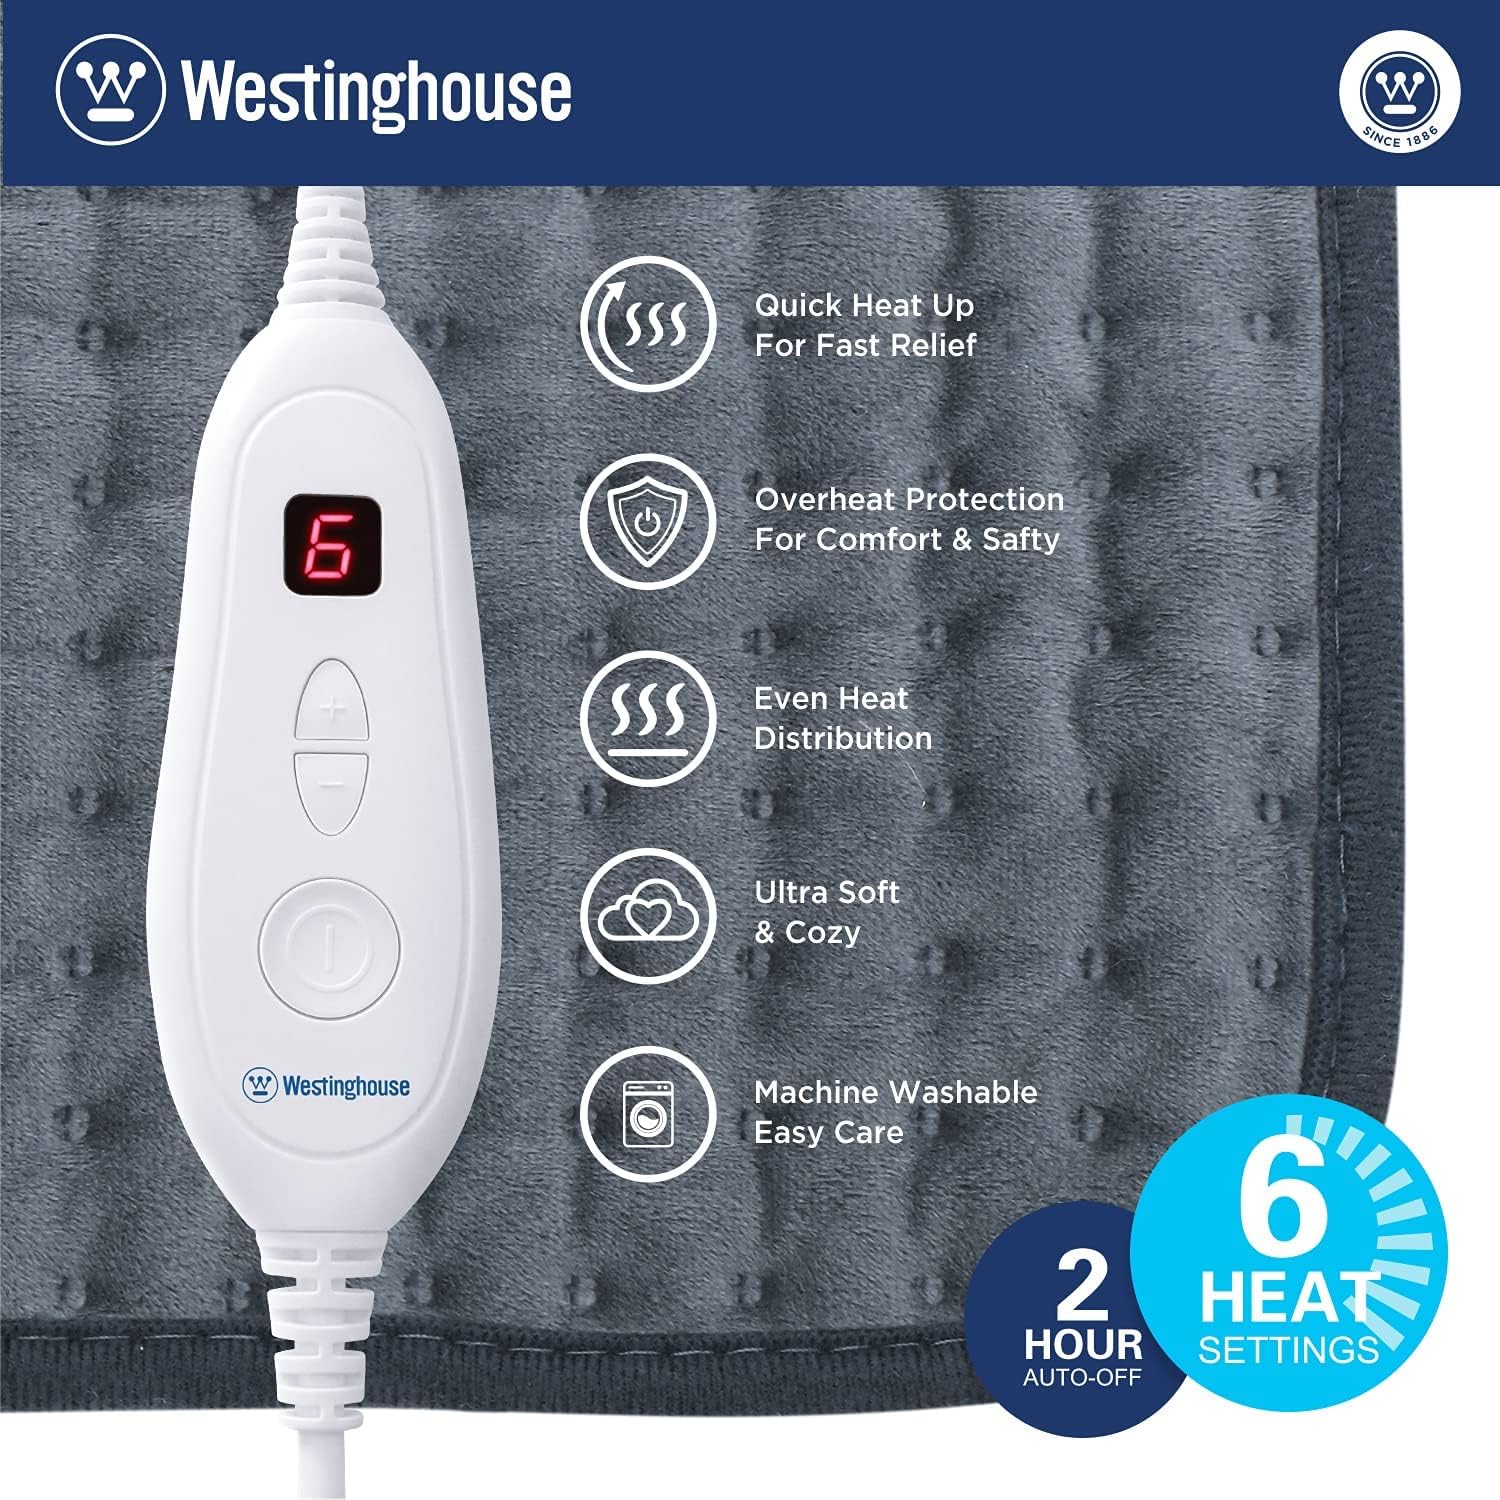 Westinghouse Electric Heating Pad for Back Pain Relief with 6 Heat Settings, 2-Hour Auto Shut-Off, Machine Washable, Extra Large 12x24 Inches